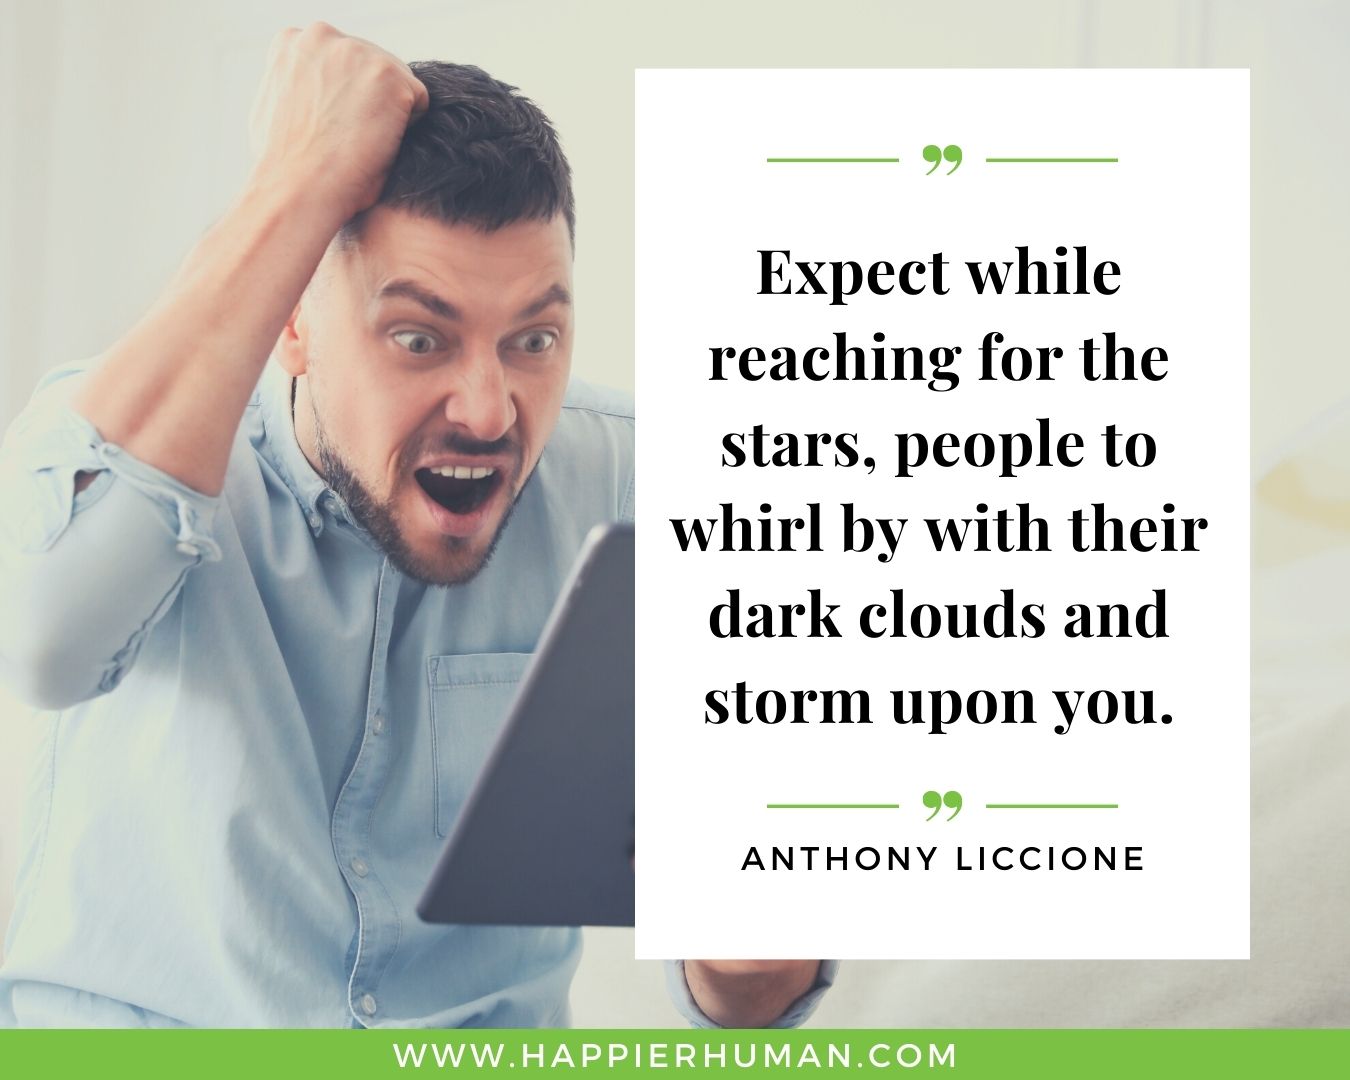 Haters Quotes - “Expect while reaching for the stars, people to whirl by with their dark clouds and storm upon you.” - Anthony Liccione